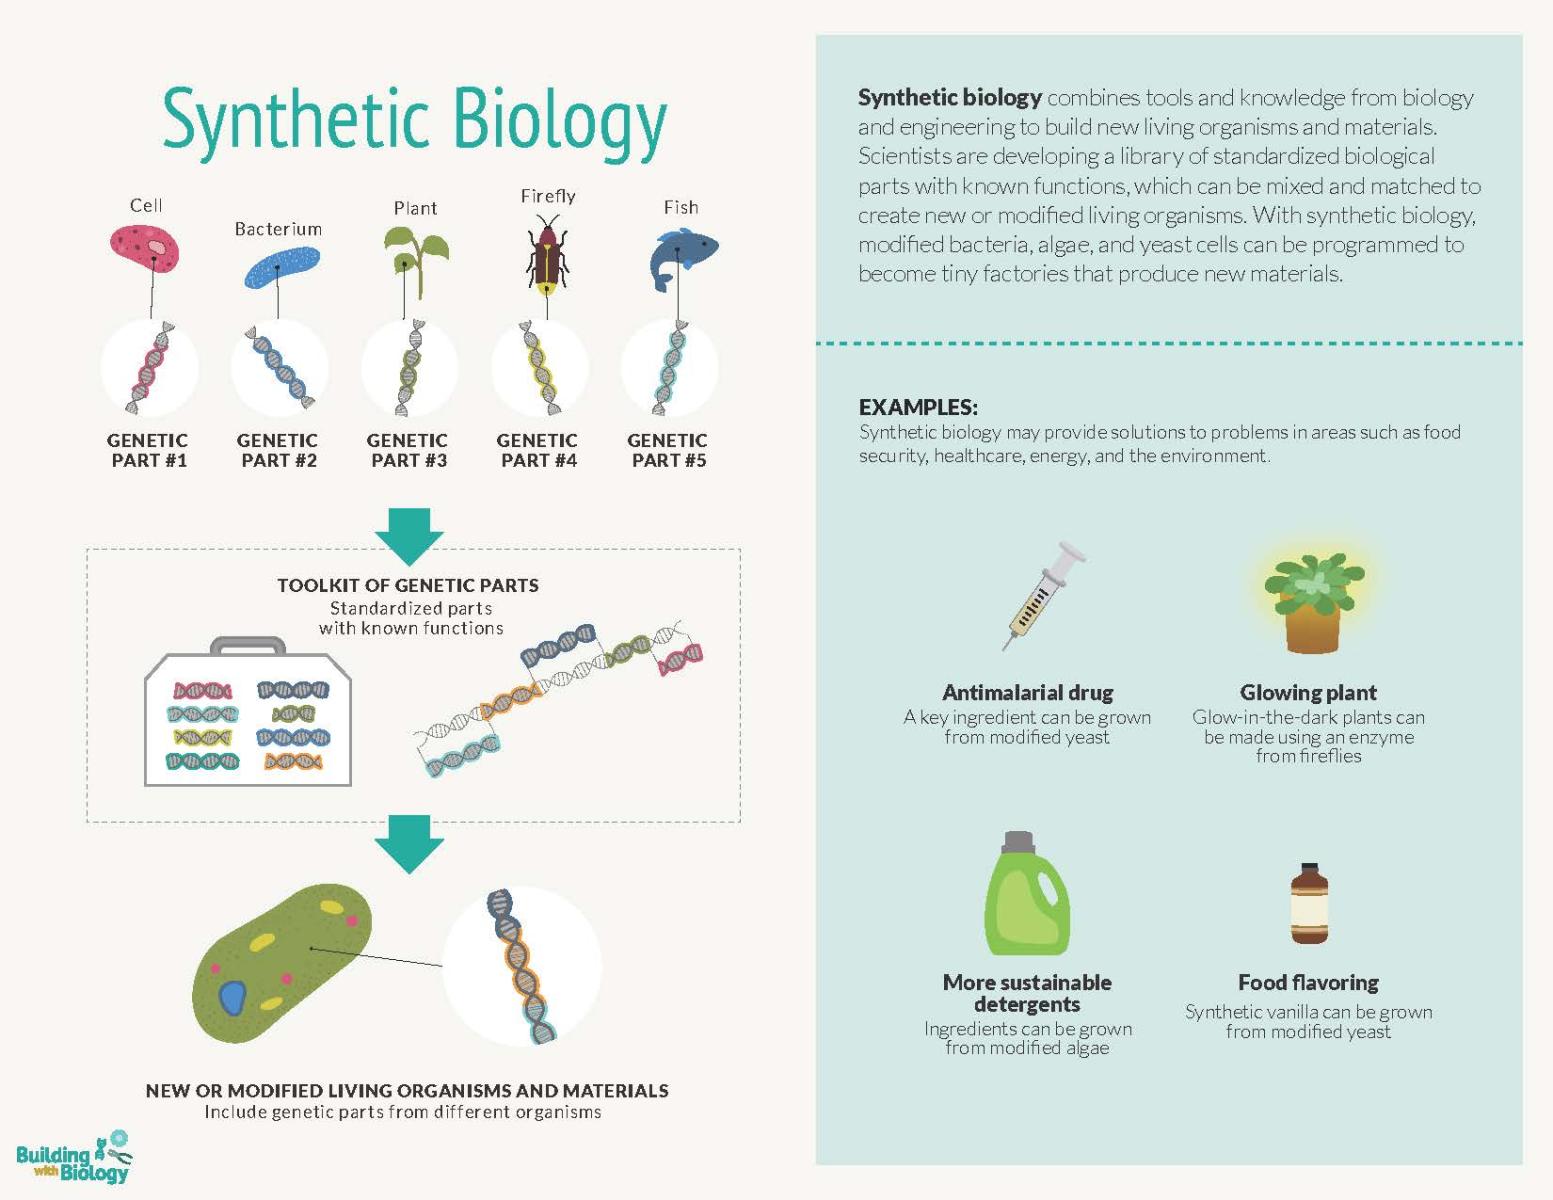 Image of a Synthetic Biology handout with illustrations of how DNA can be edited